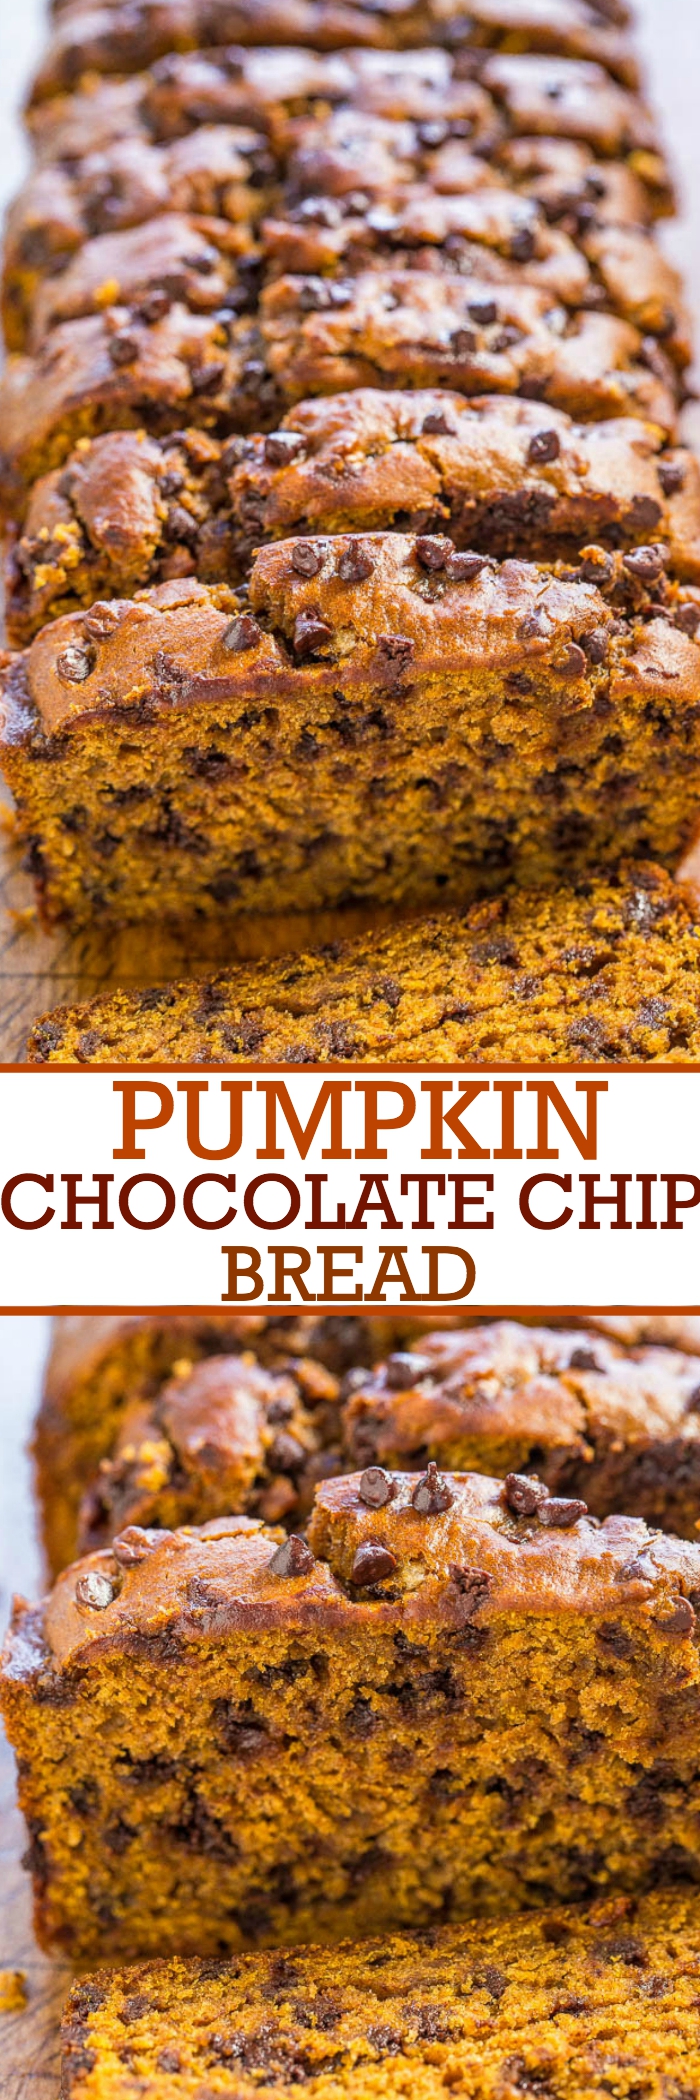 The Best Pumpkin Chocolate Chip Bread - Super soft, moist, rich pumpkin flavor, and loaded with chocolate chips! Easy, no mixer recipe that's the BEST!!